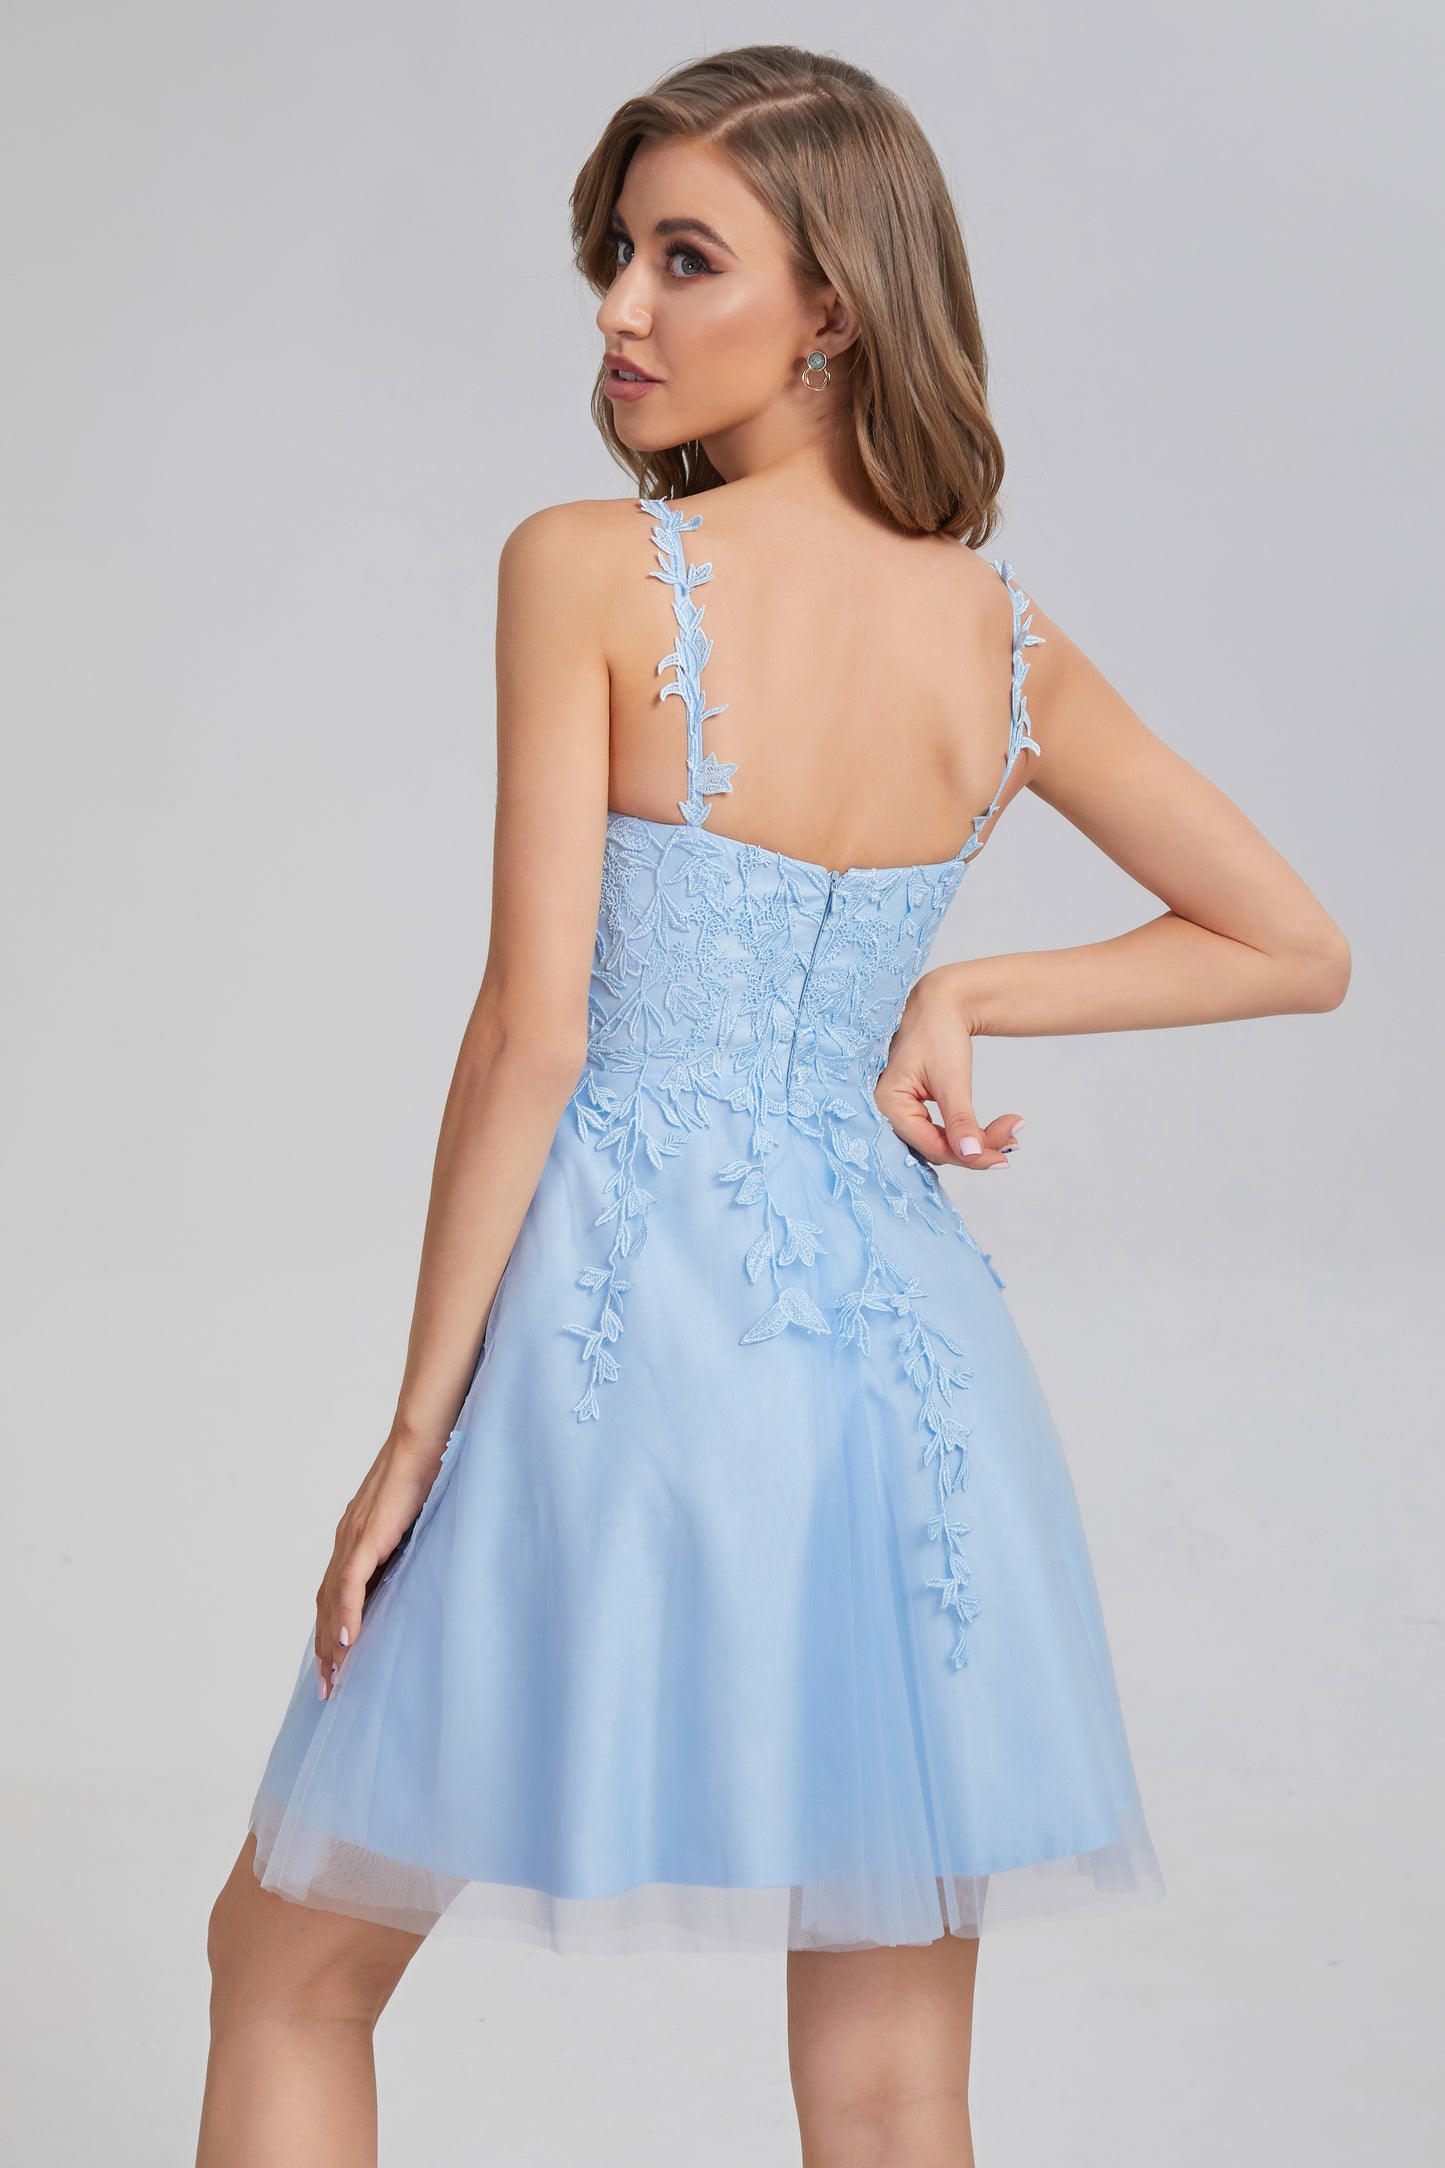 Spaghetti Straps Backless Appliques Homecoming Dresses